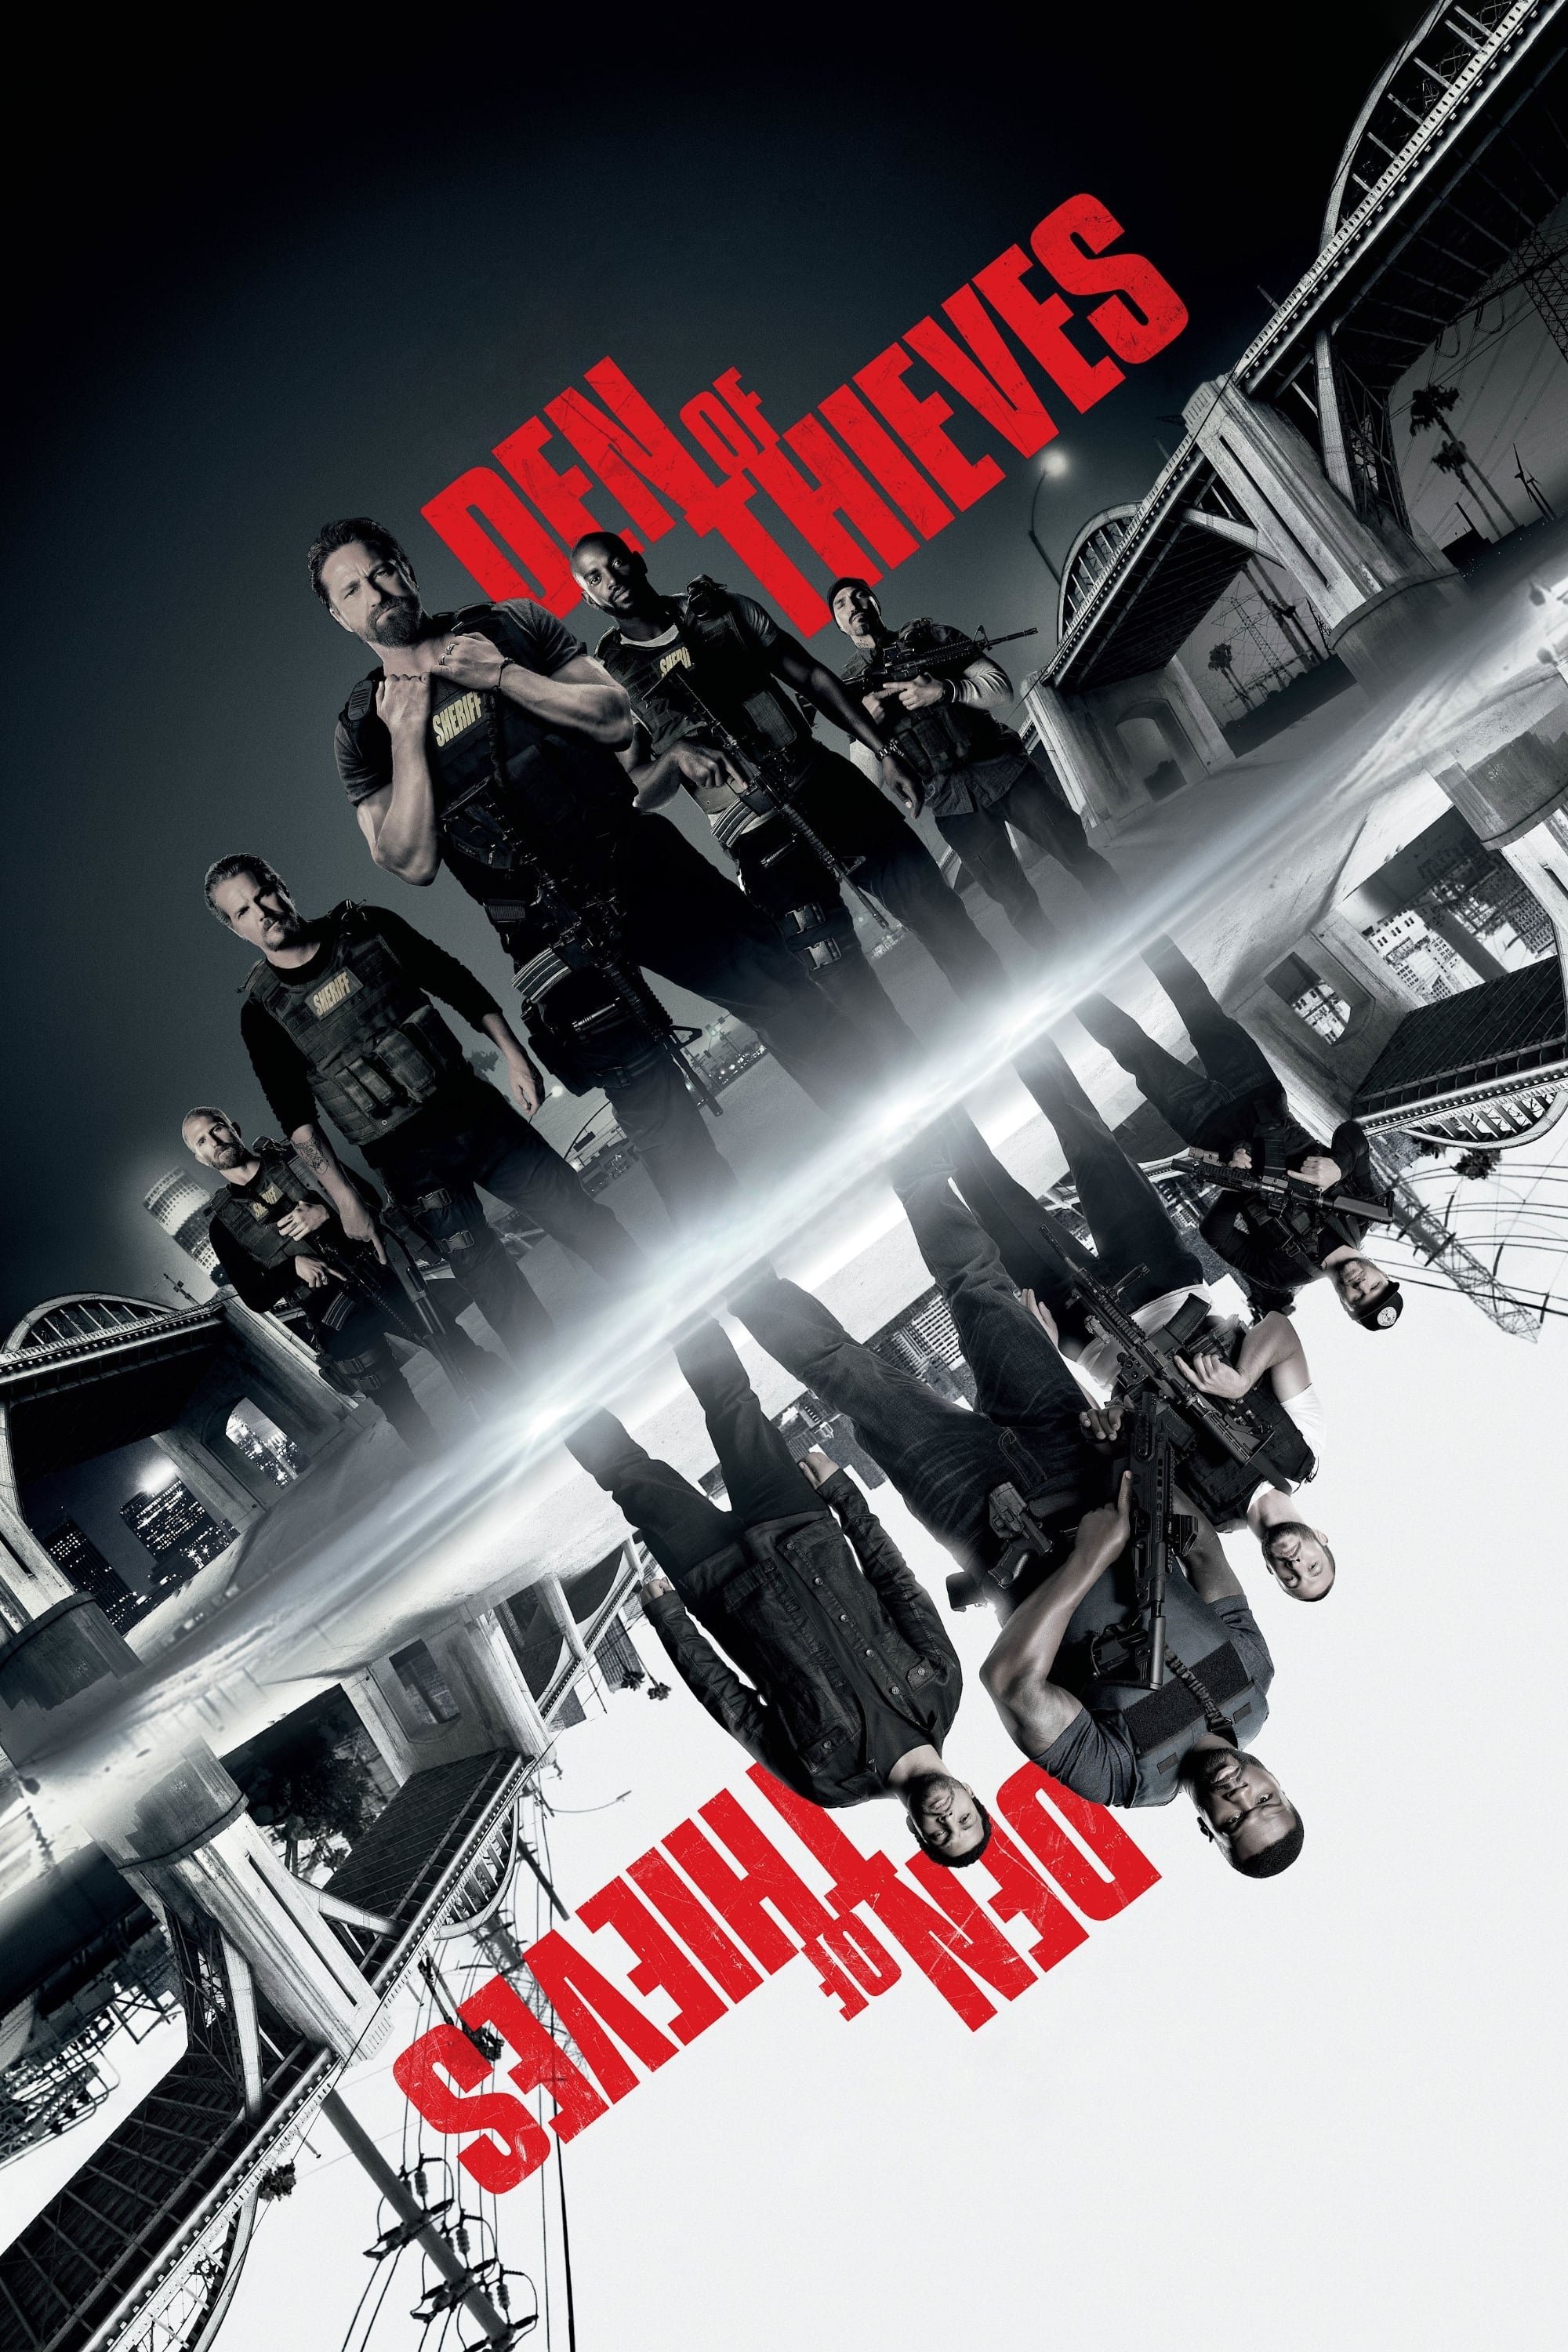 Den of Thieves, Criminal underworld, Posters collection, Exciting movie, 2000x3000 HD Phone